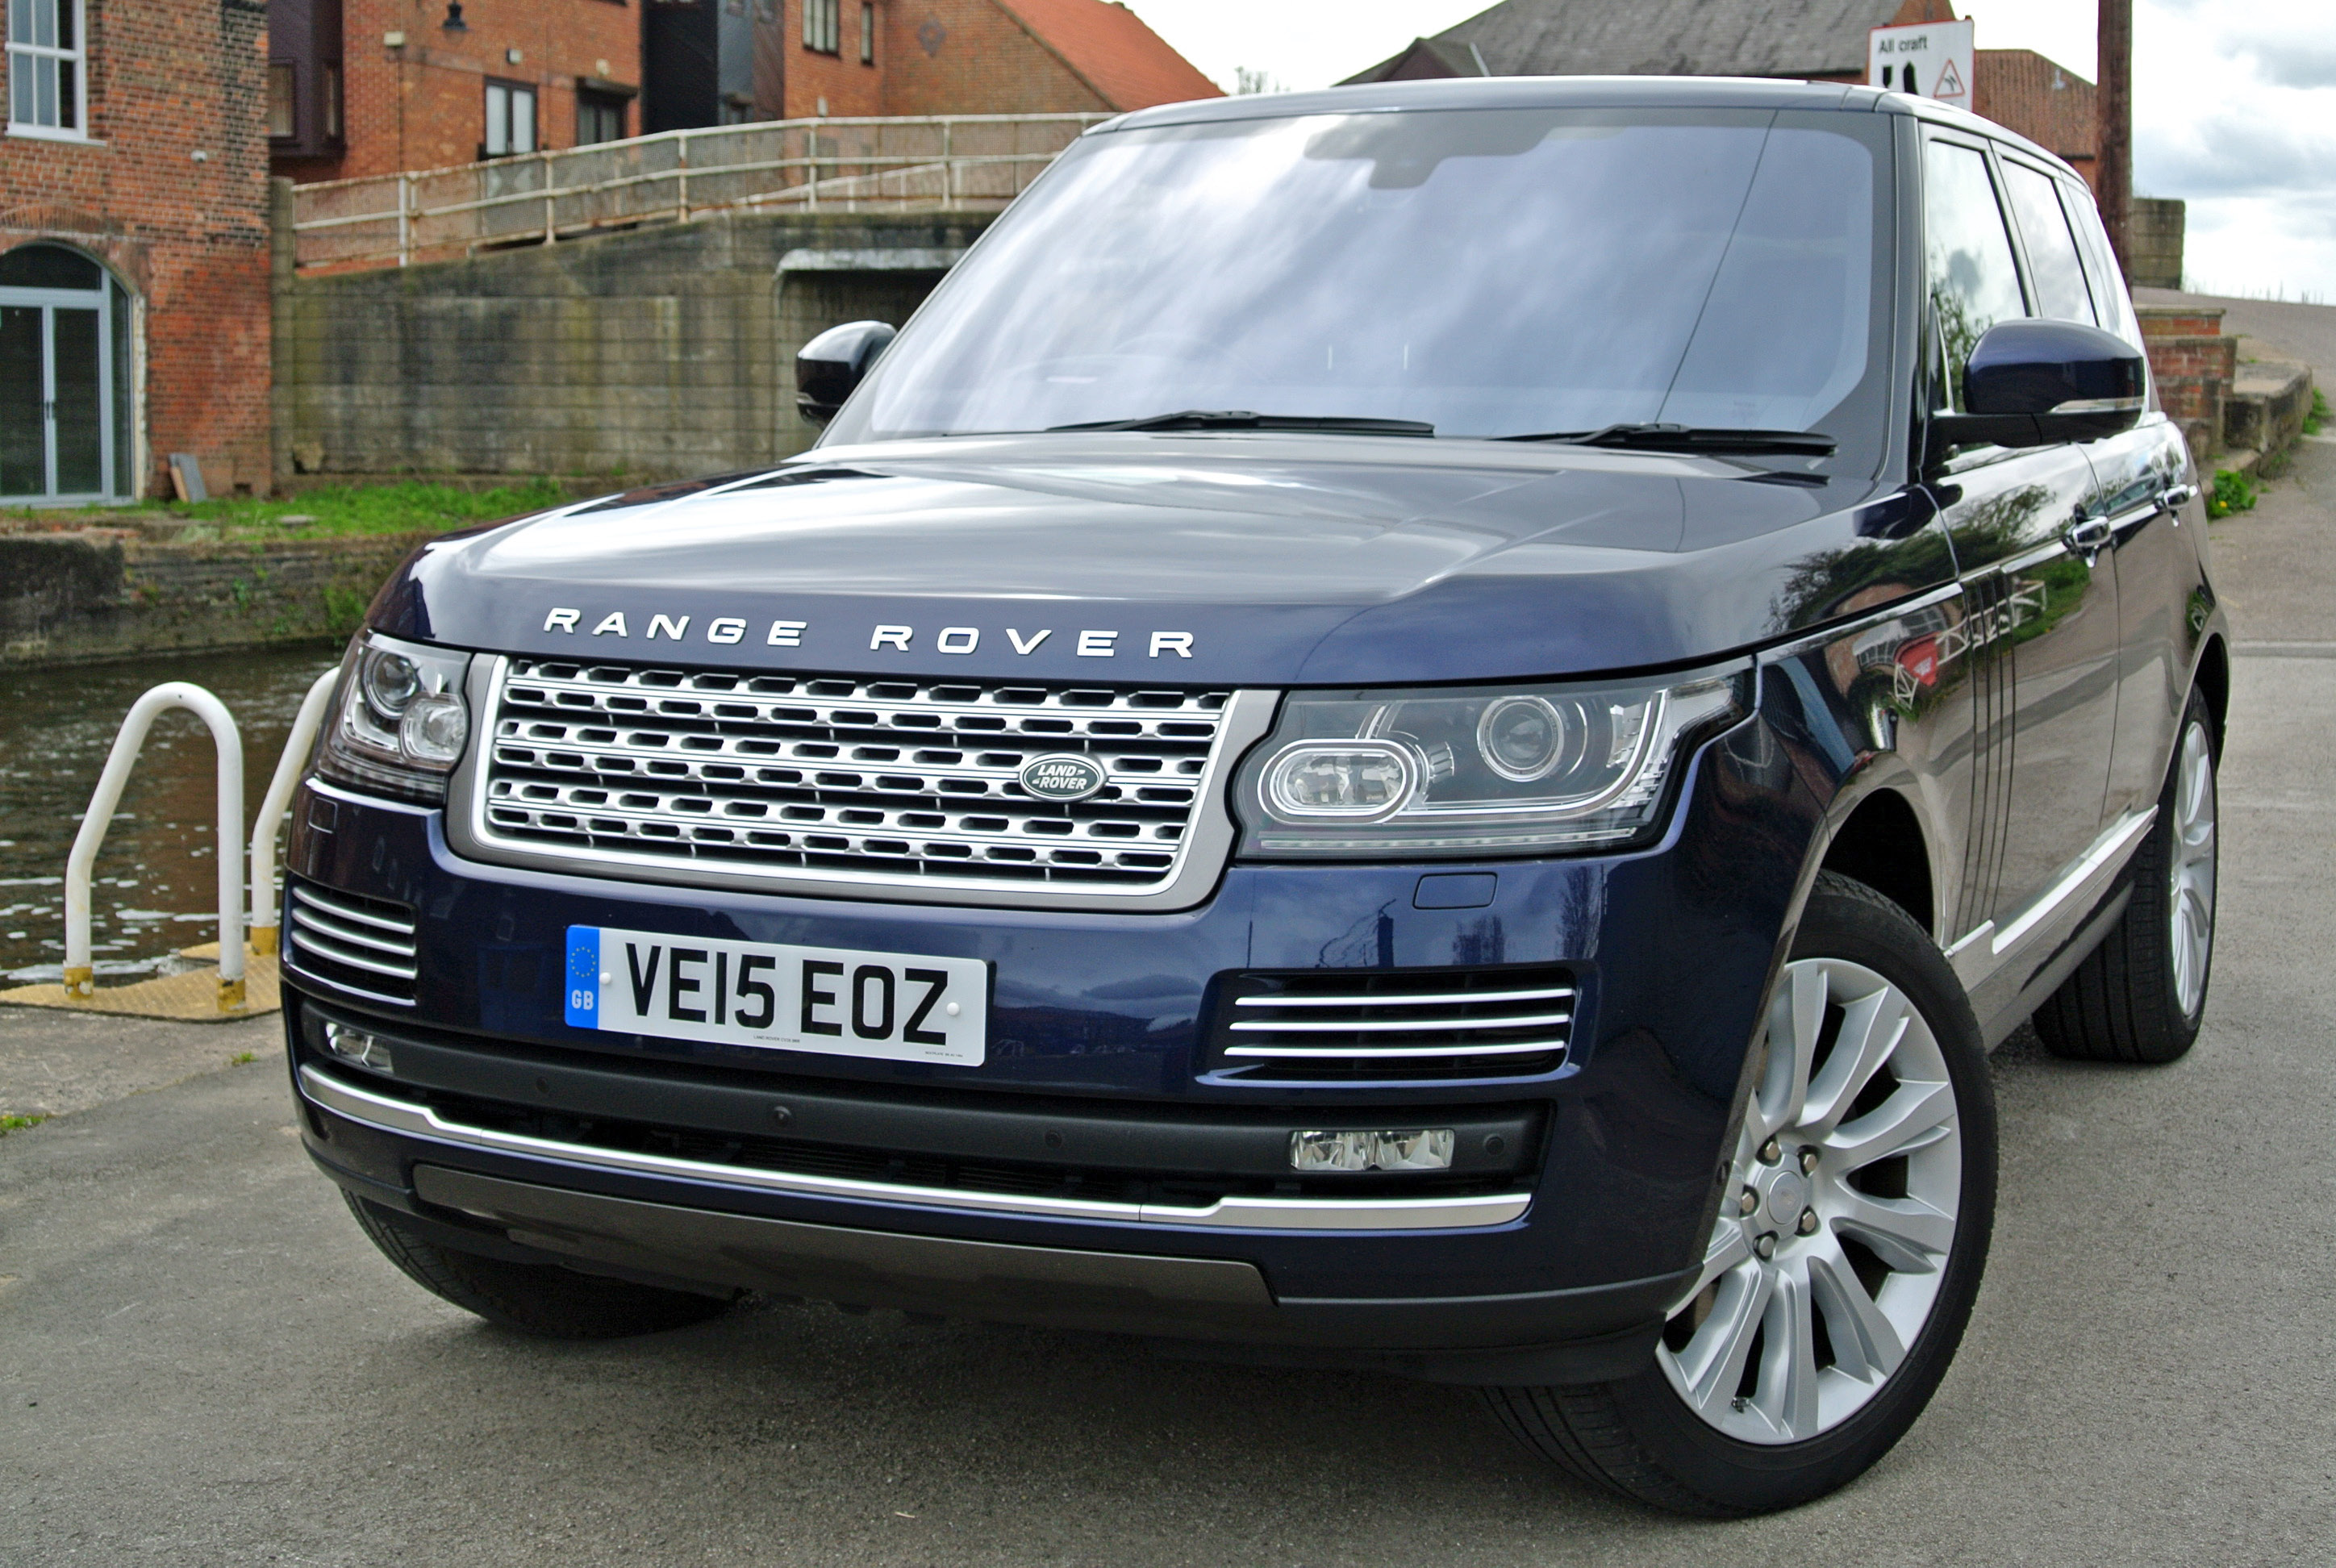 Top-specification Range Rover is a real ‘monster’ in most respects